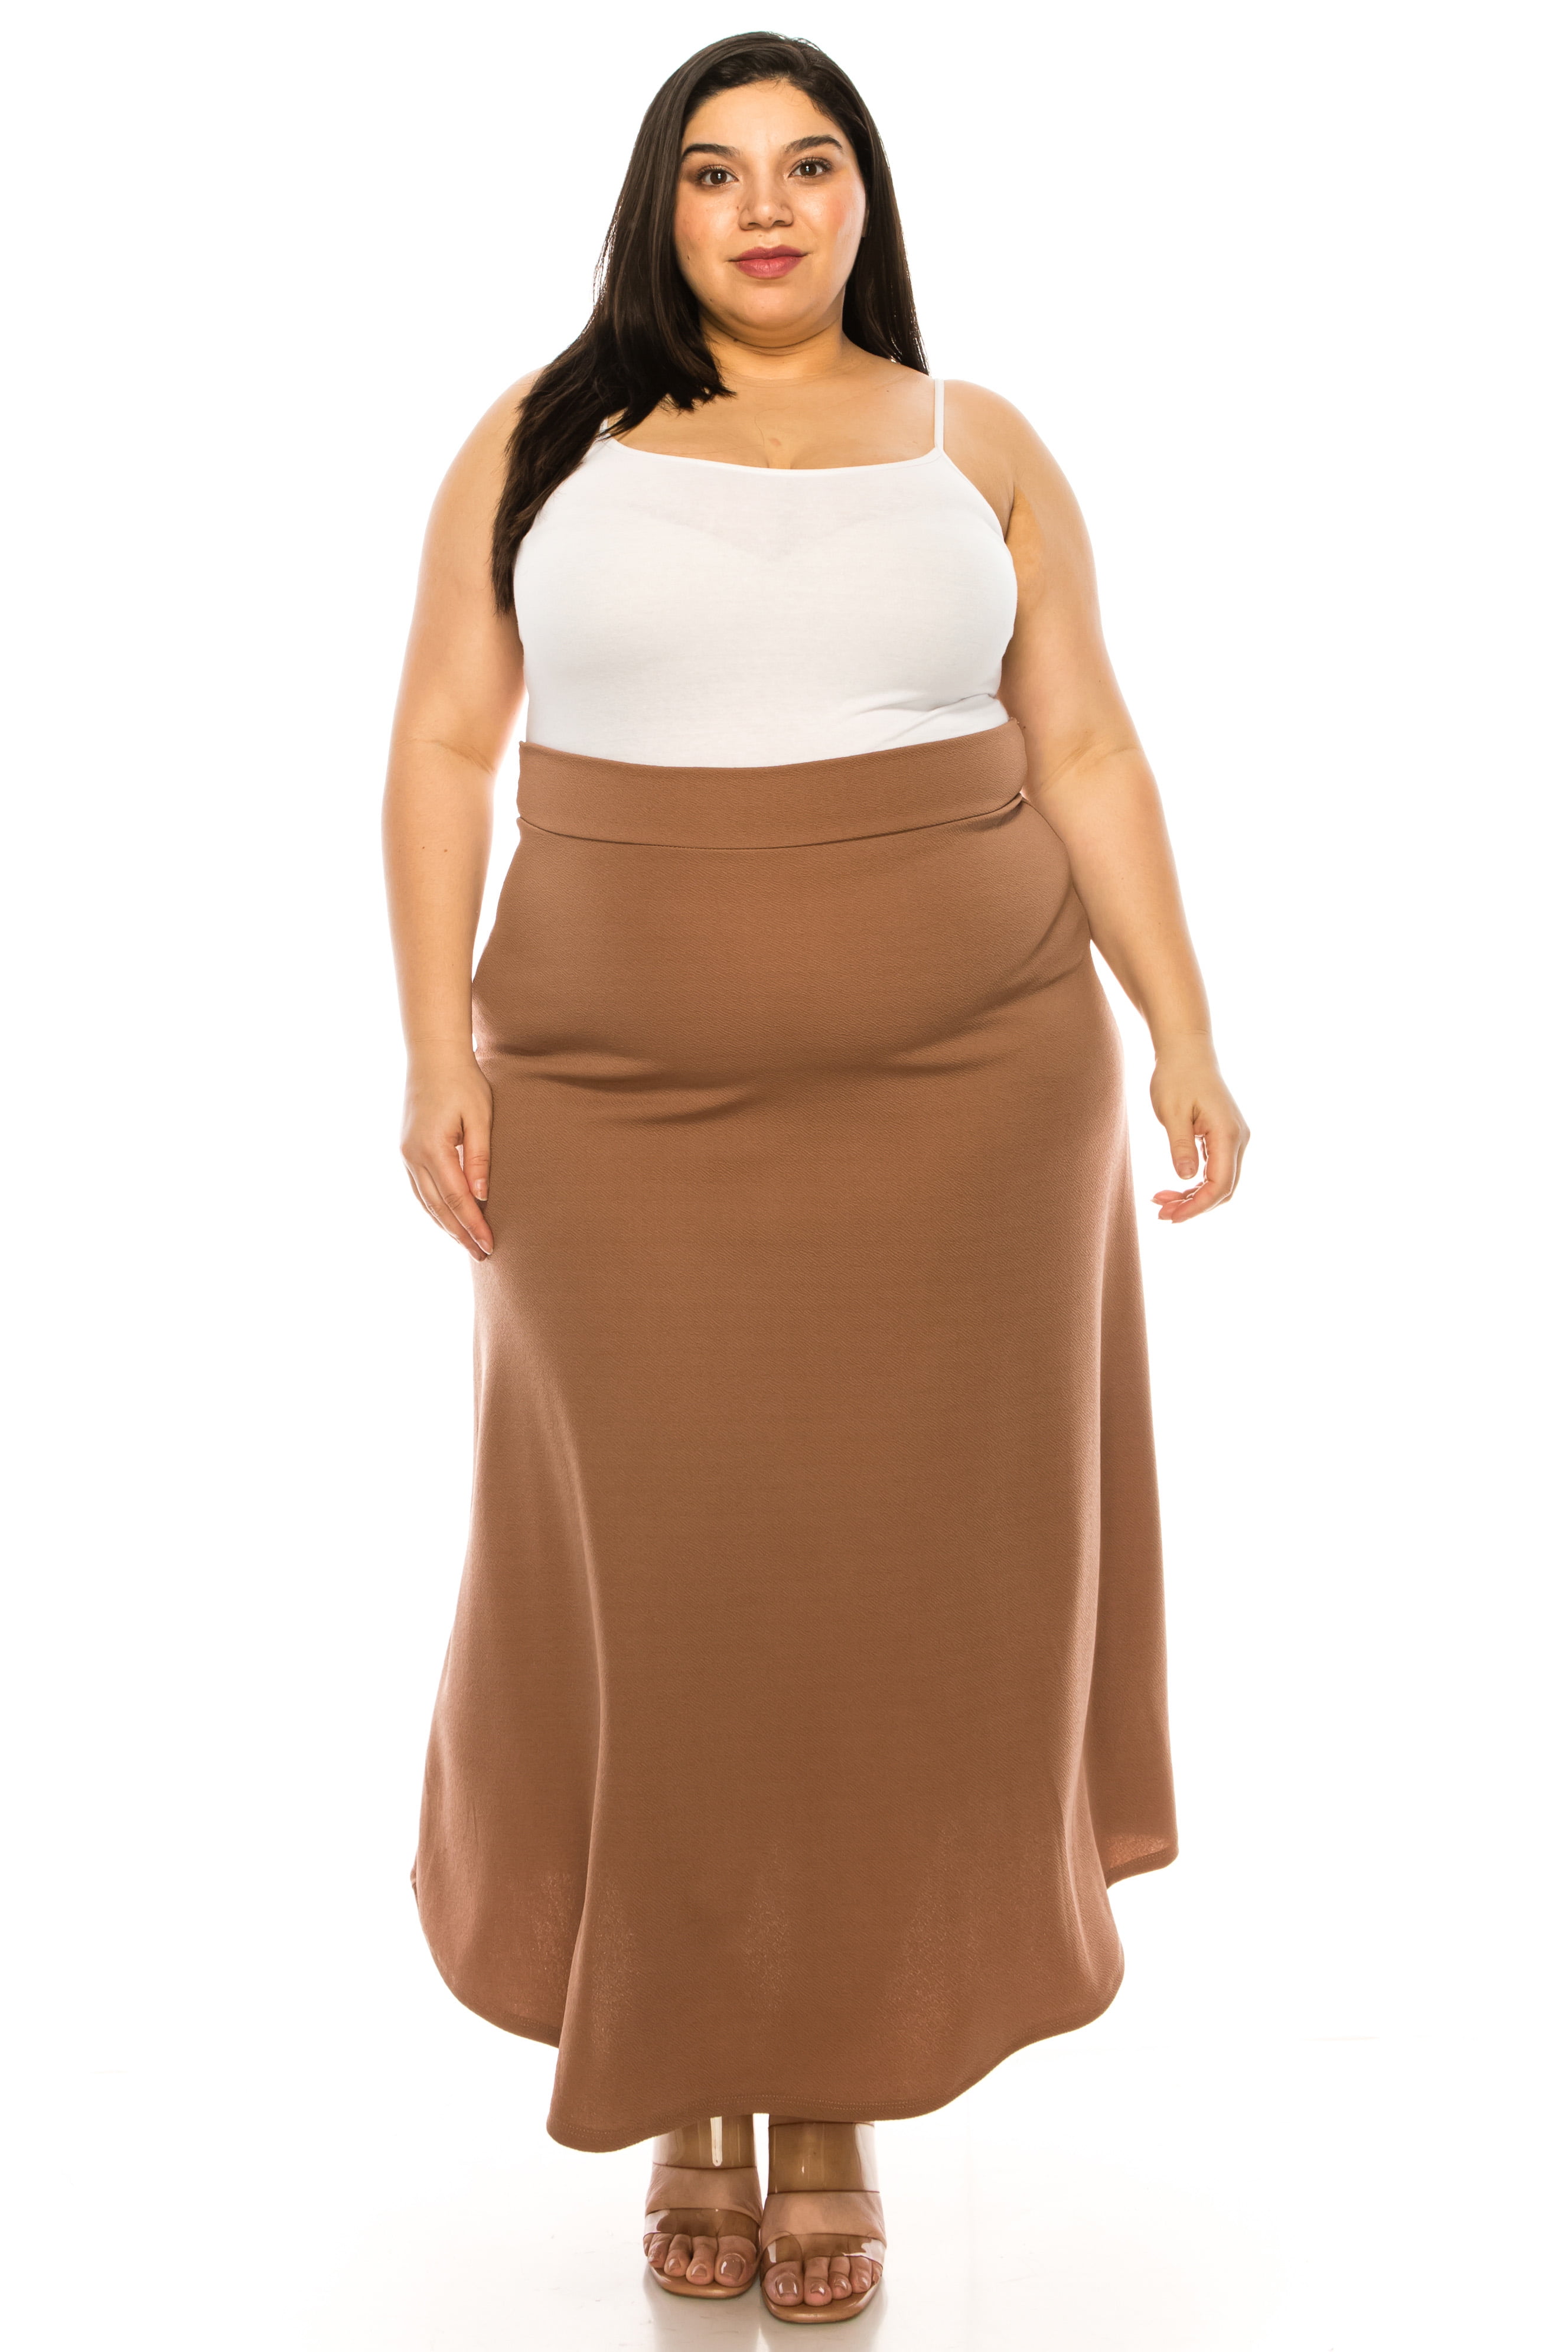 Women's Plus Size Solid Flare A-line Midi Skirt with Elastic -